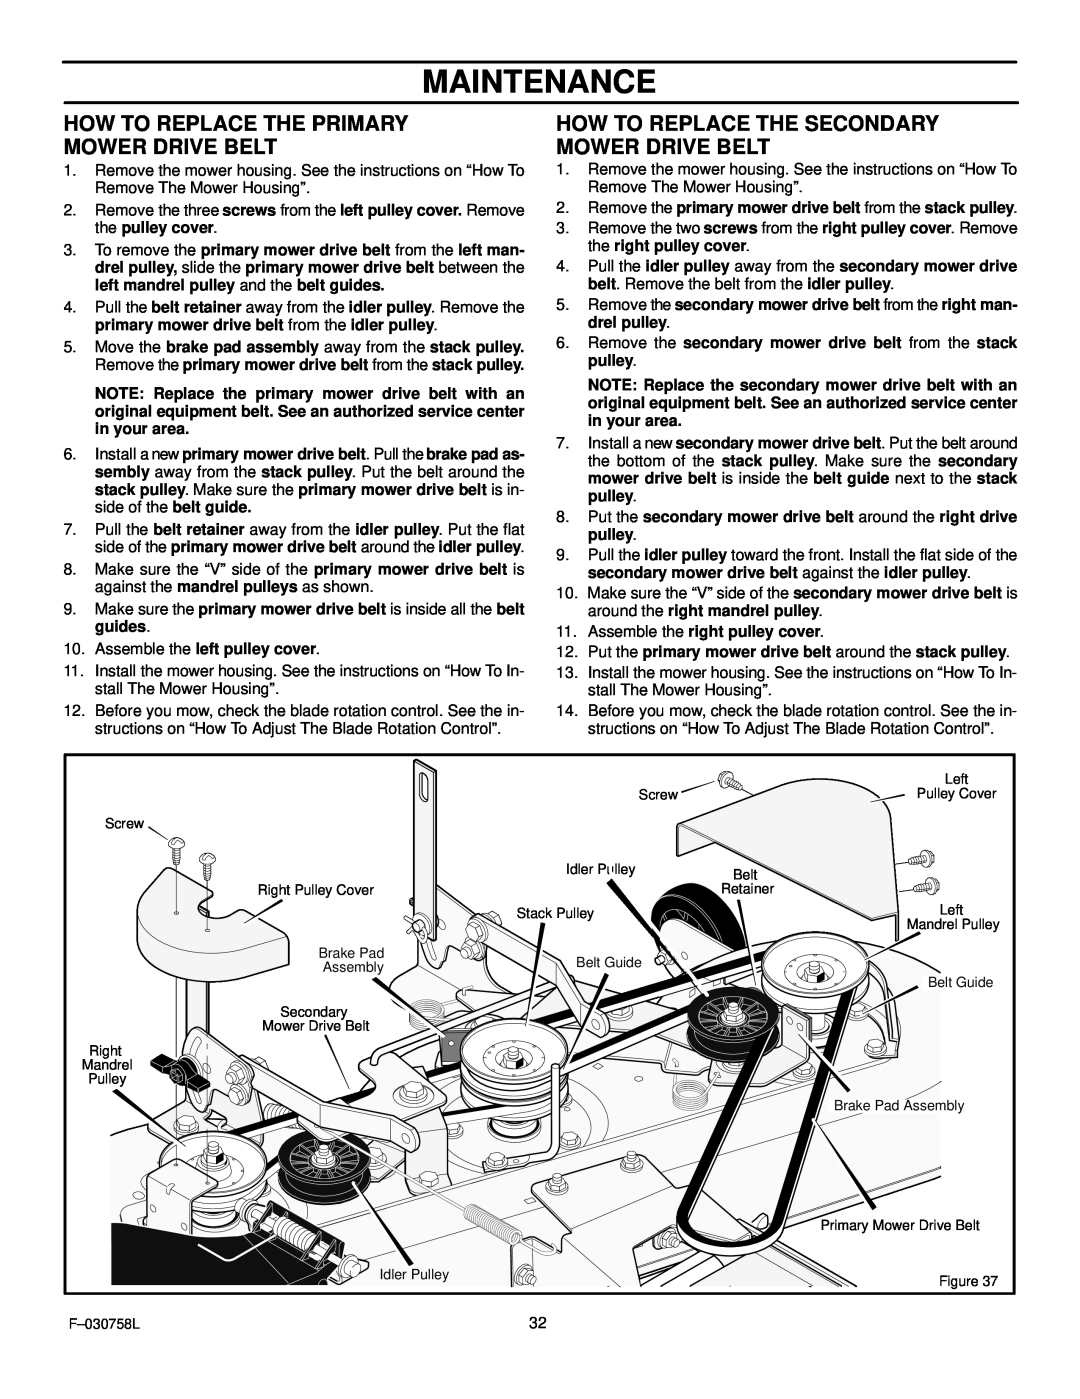 Murray 465609x24A Maintenance, How To Replace The Primary Mower Drive Belt, How To Replace The Secondary Mower Drive Belt 